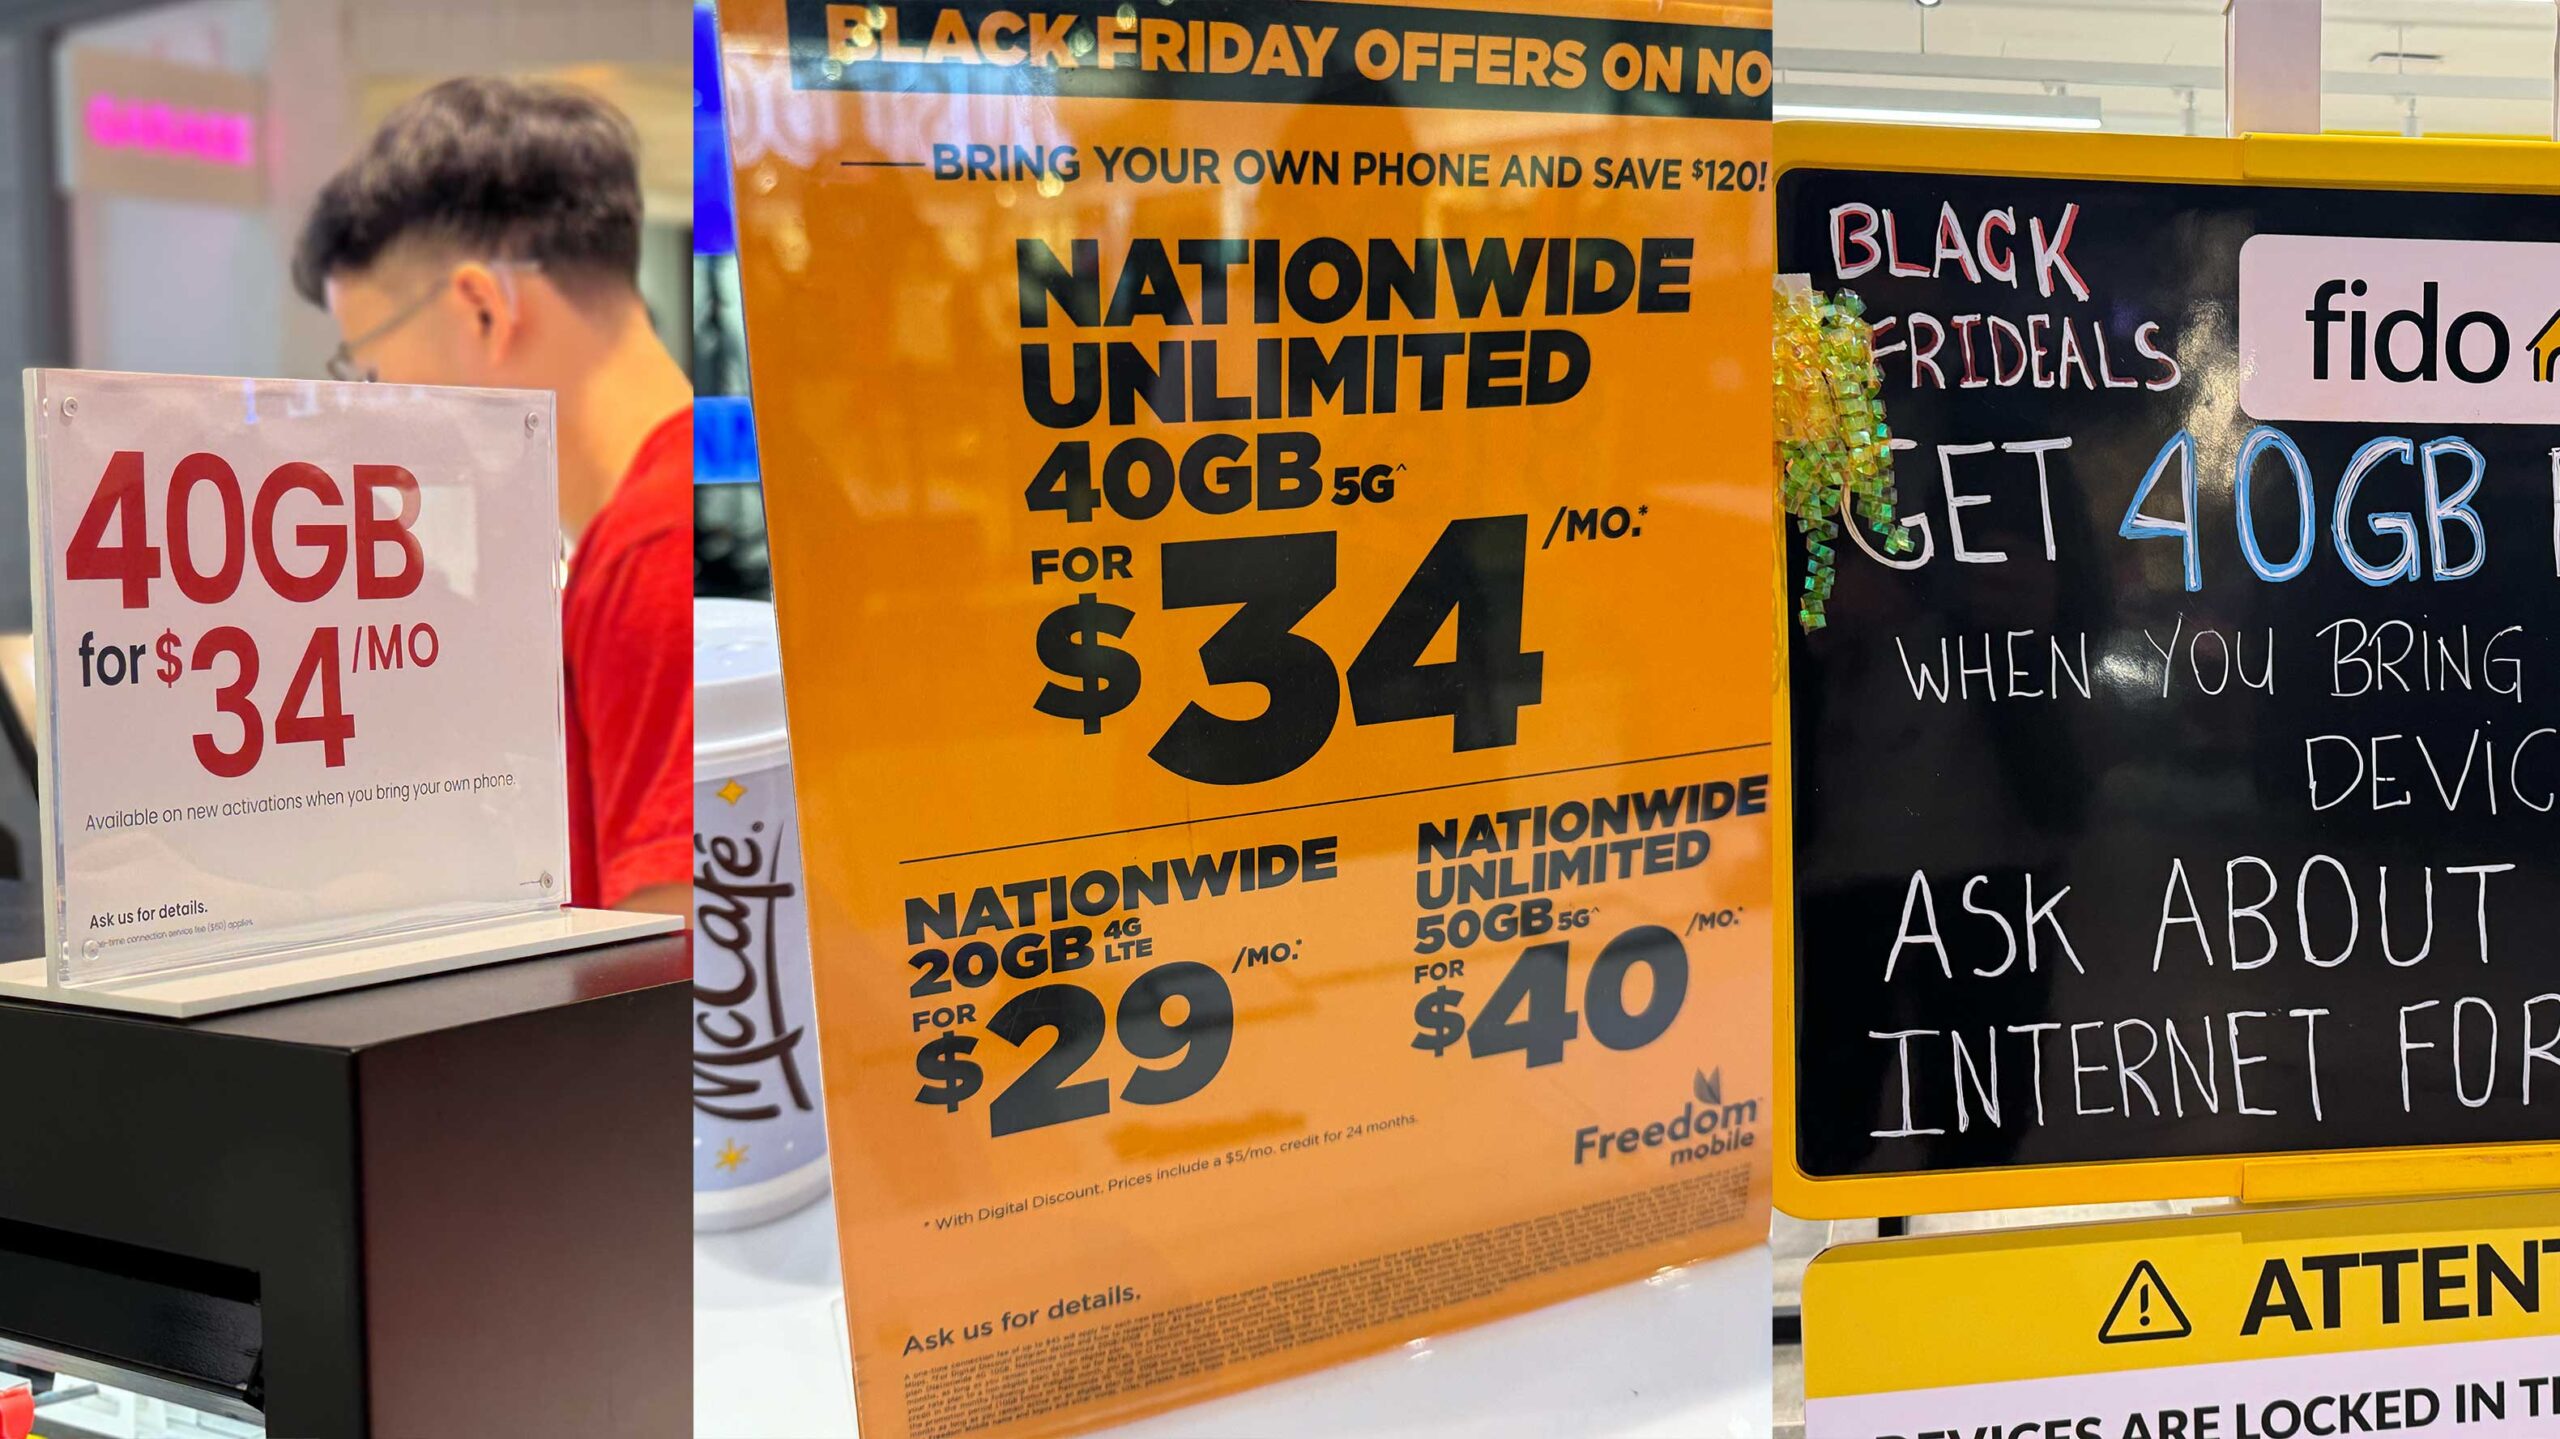 Good news: Black Friday carrier deals are just as good online as